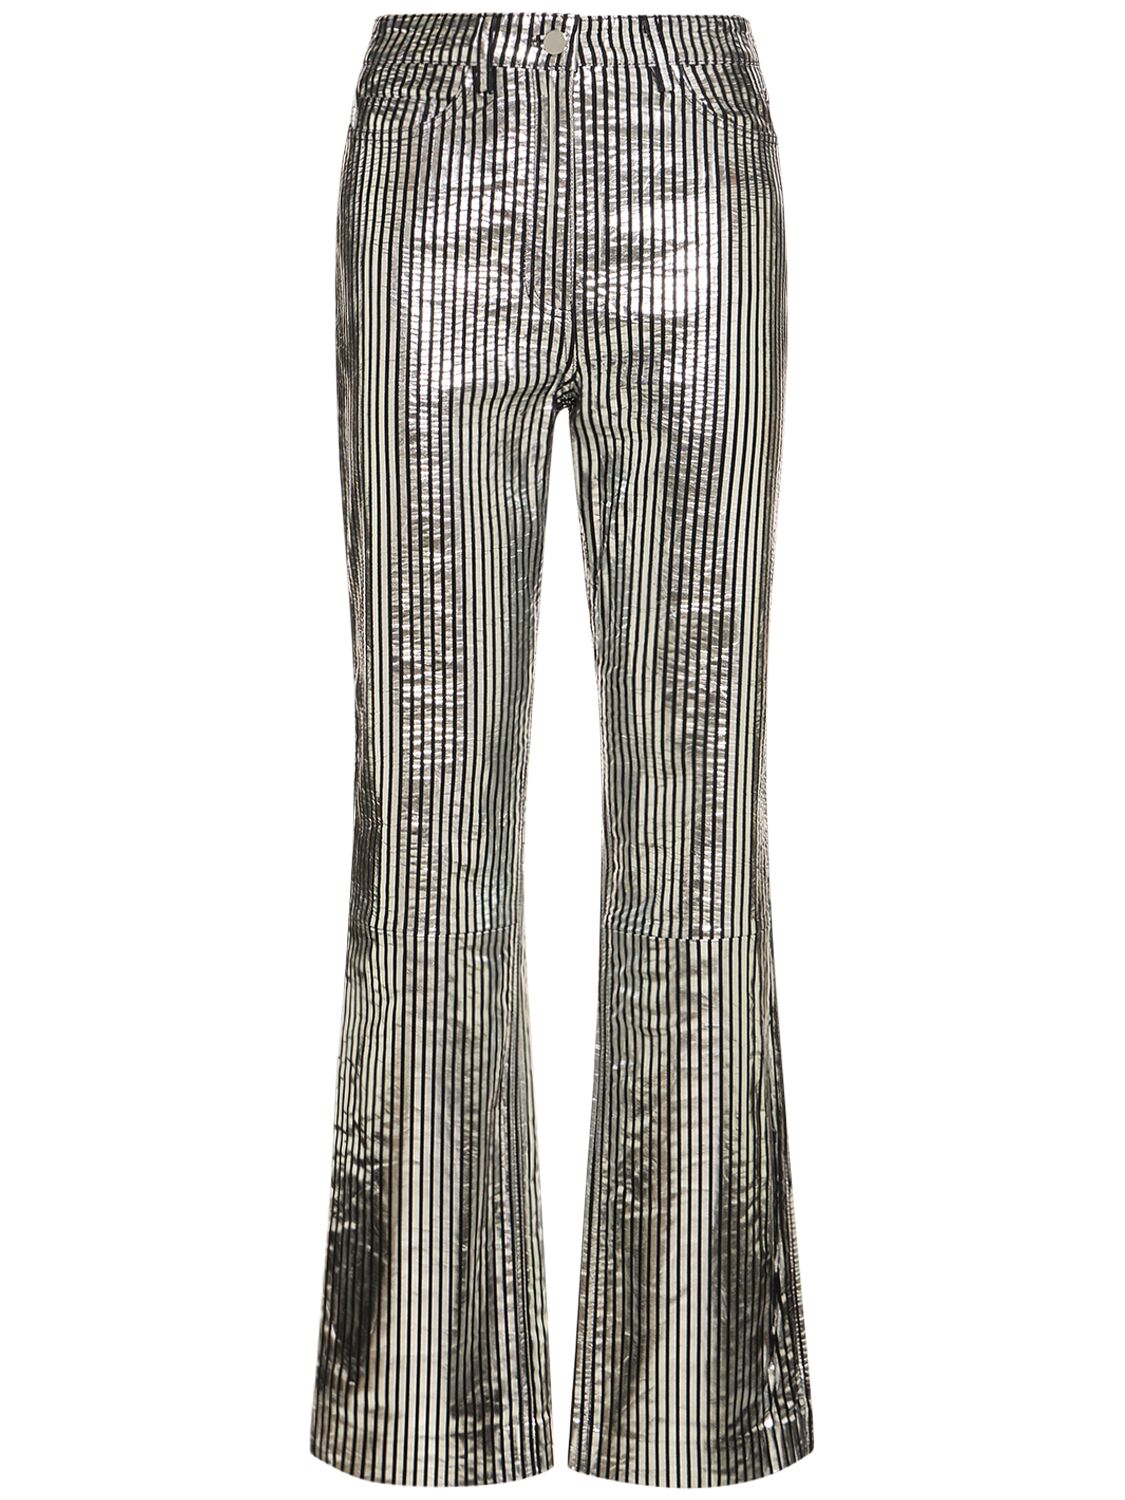 Striped Leather Pants